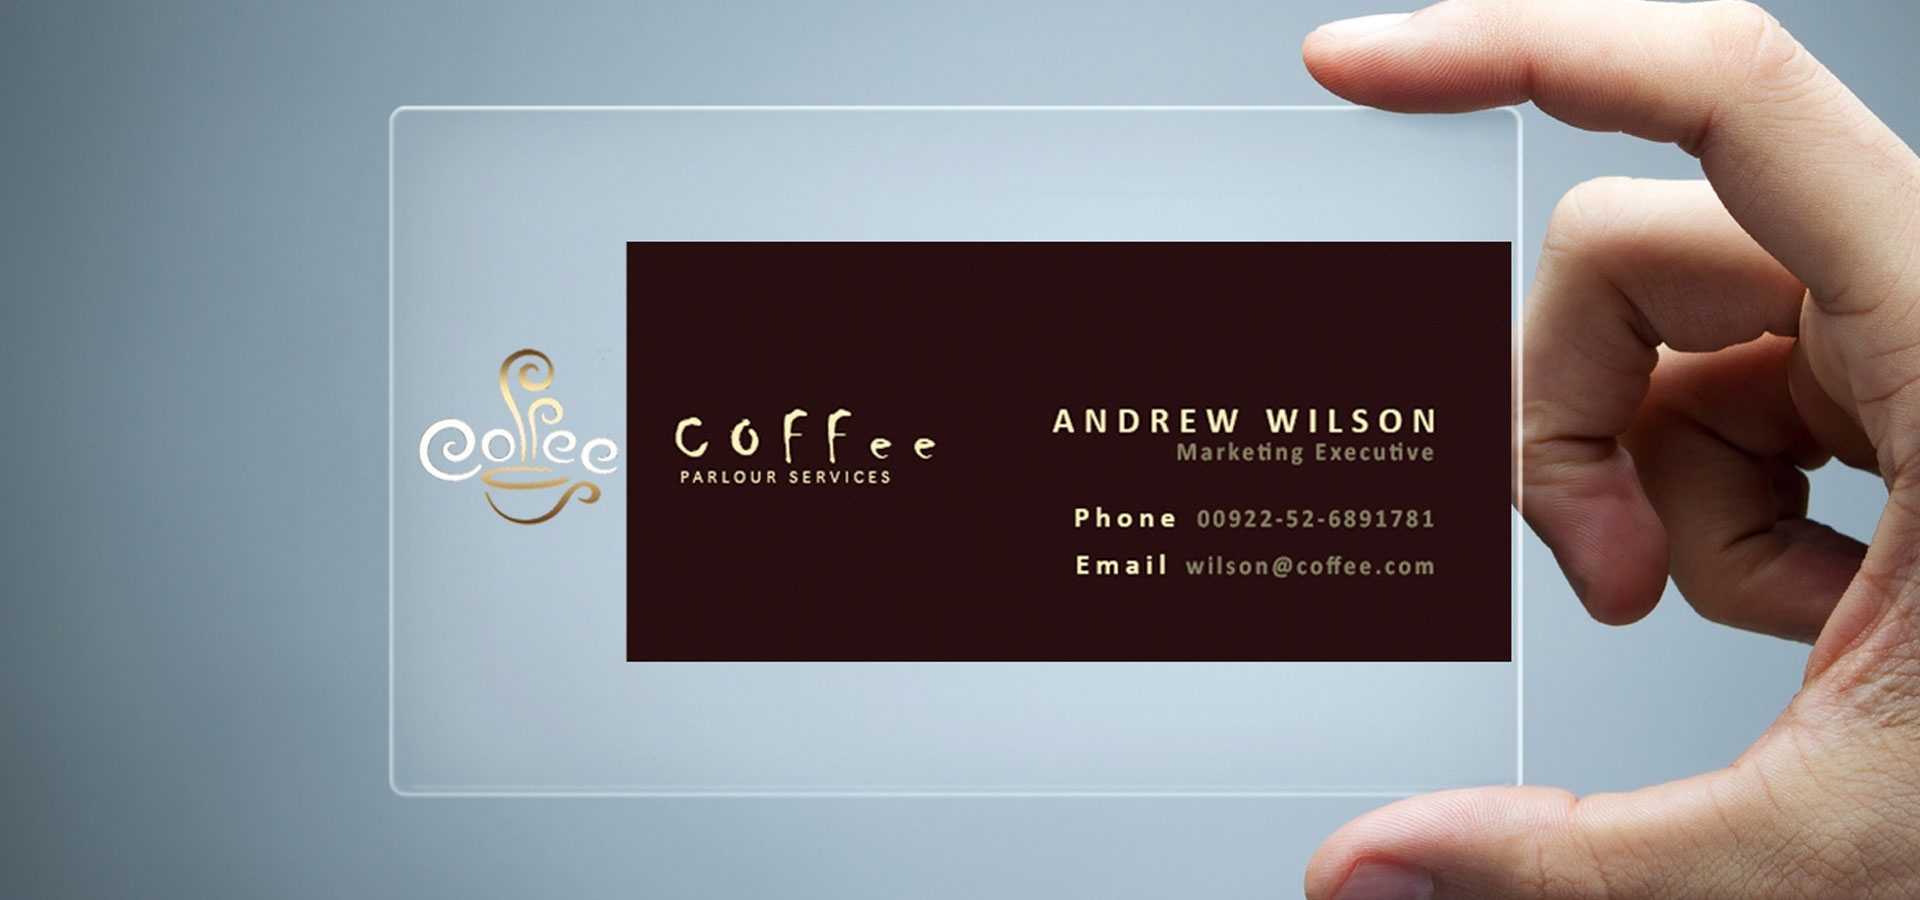 26+ Transparent Business Card Templates - Illustrator, Ms Pertaining To Microsoft Templates For Business Cards